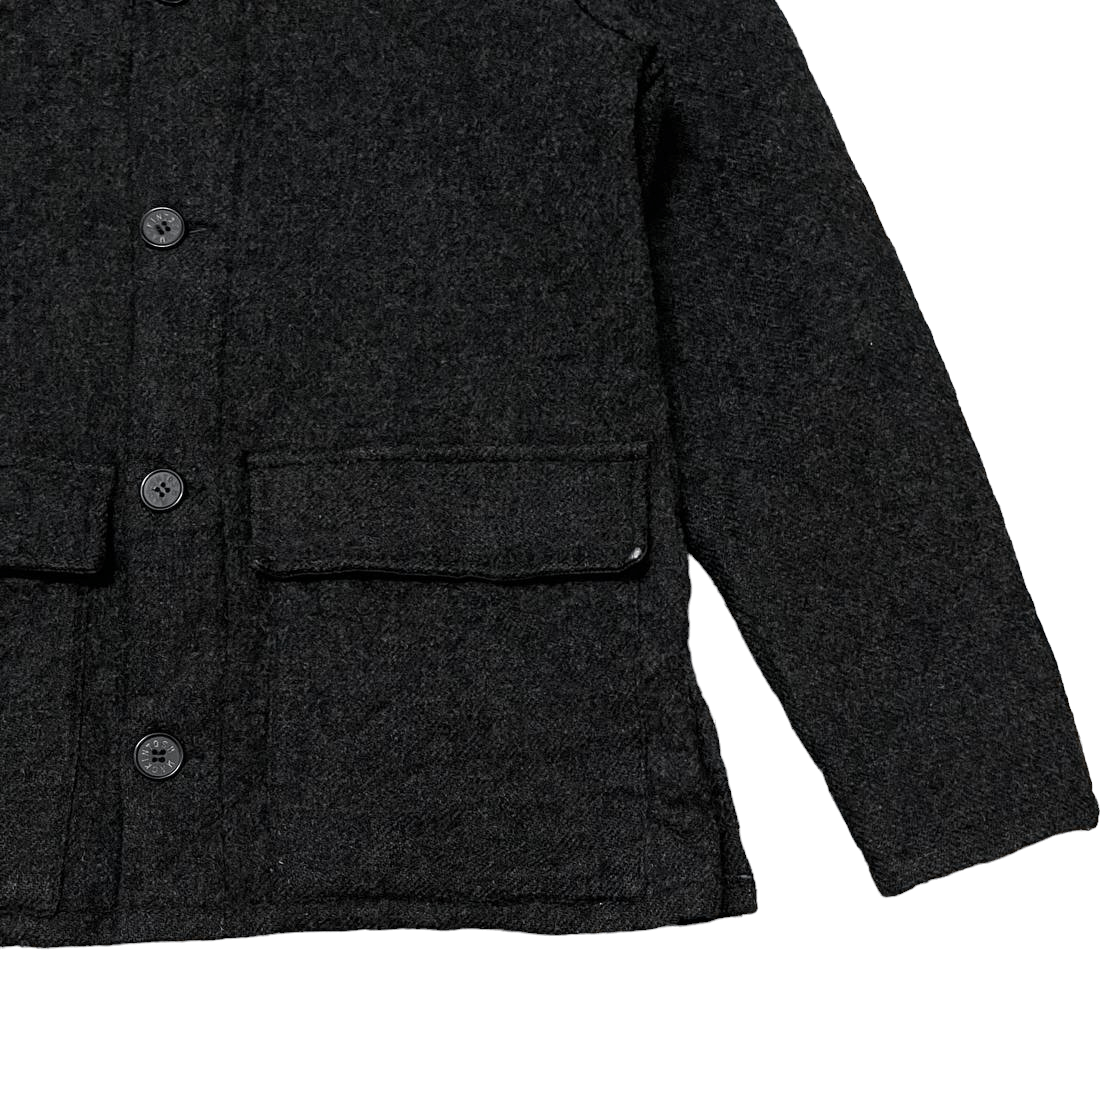 Mackintosh x Paul Smith Wool Jacket Quilted Lining - 4